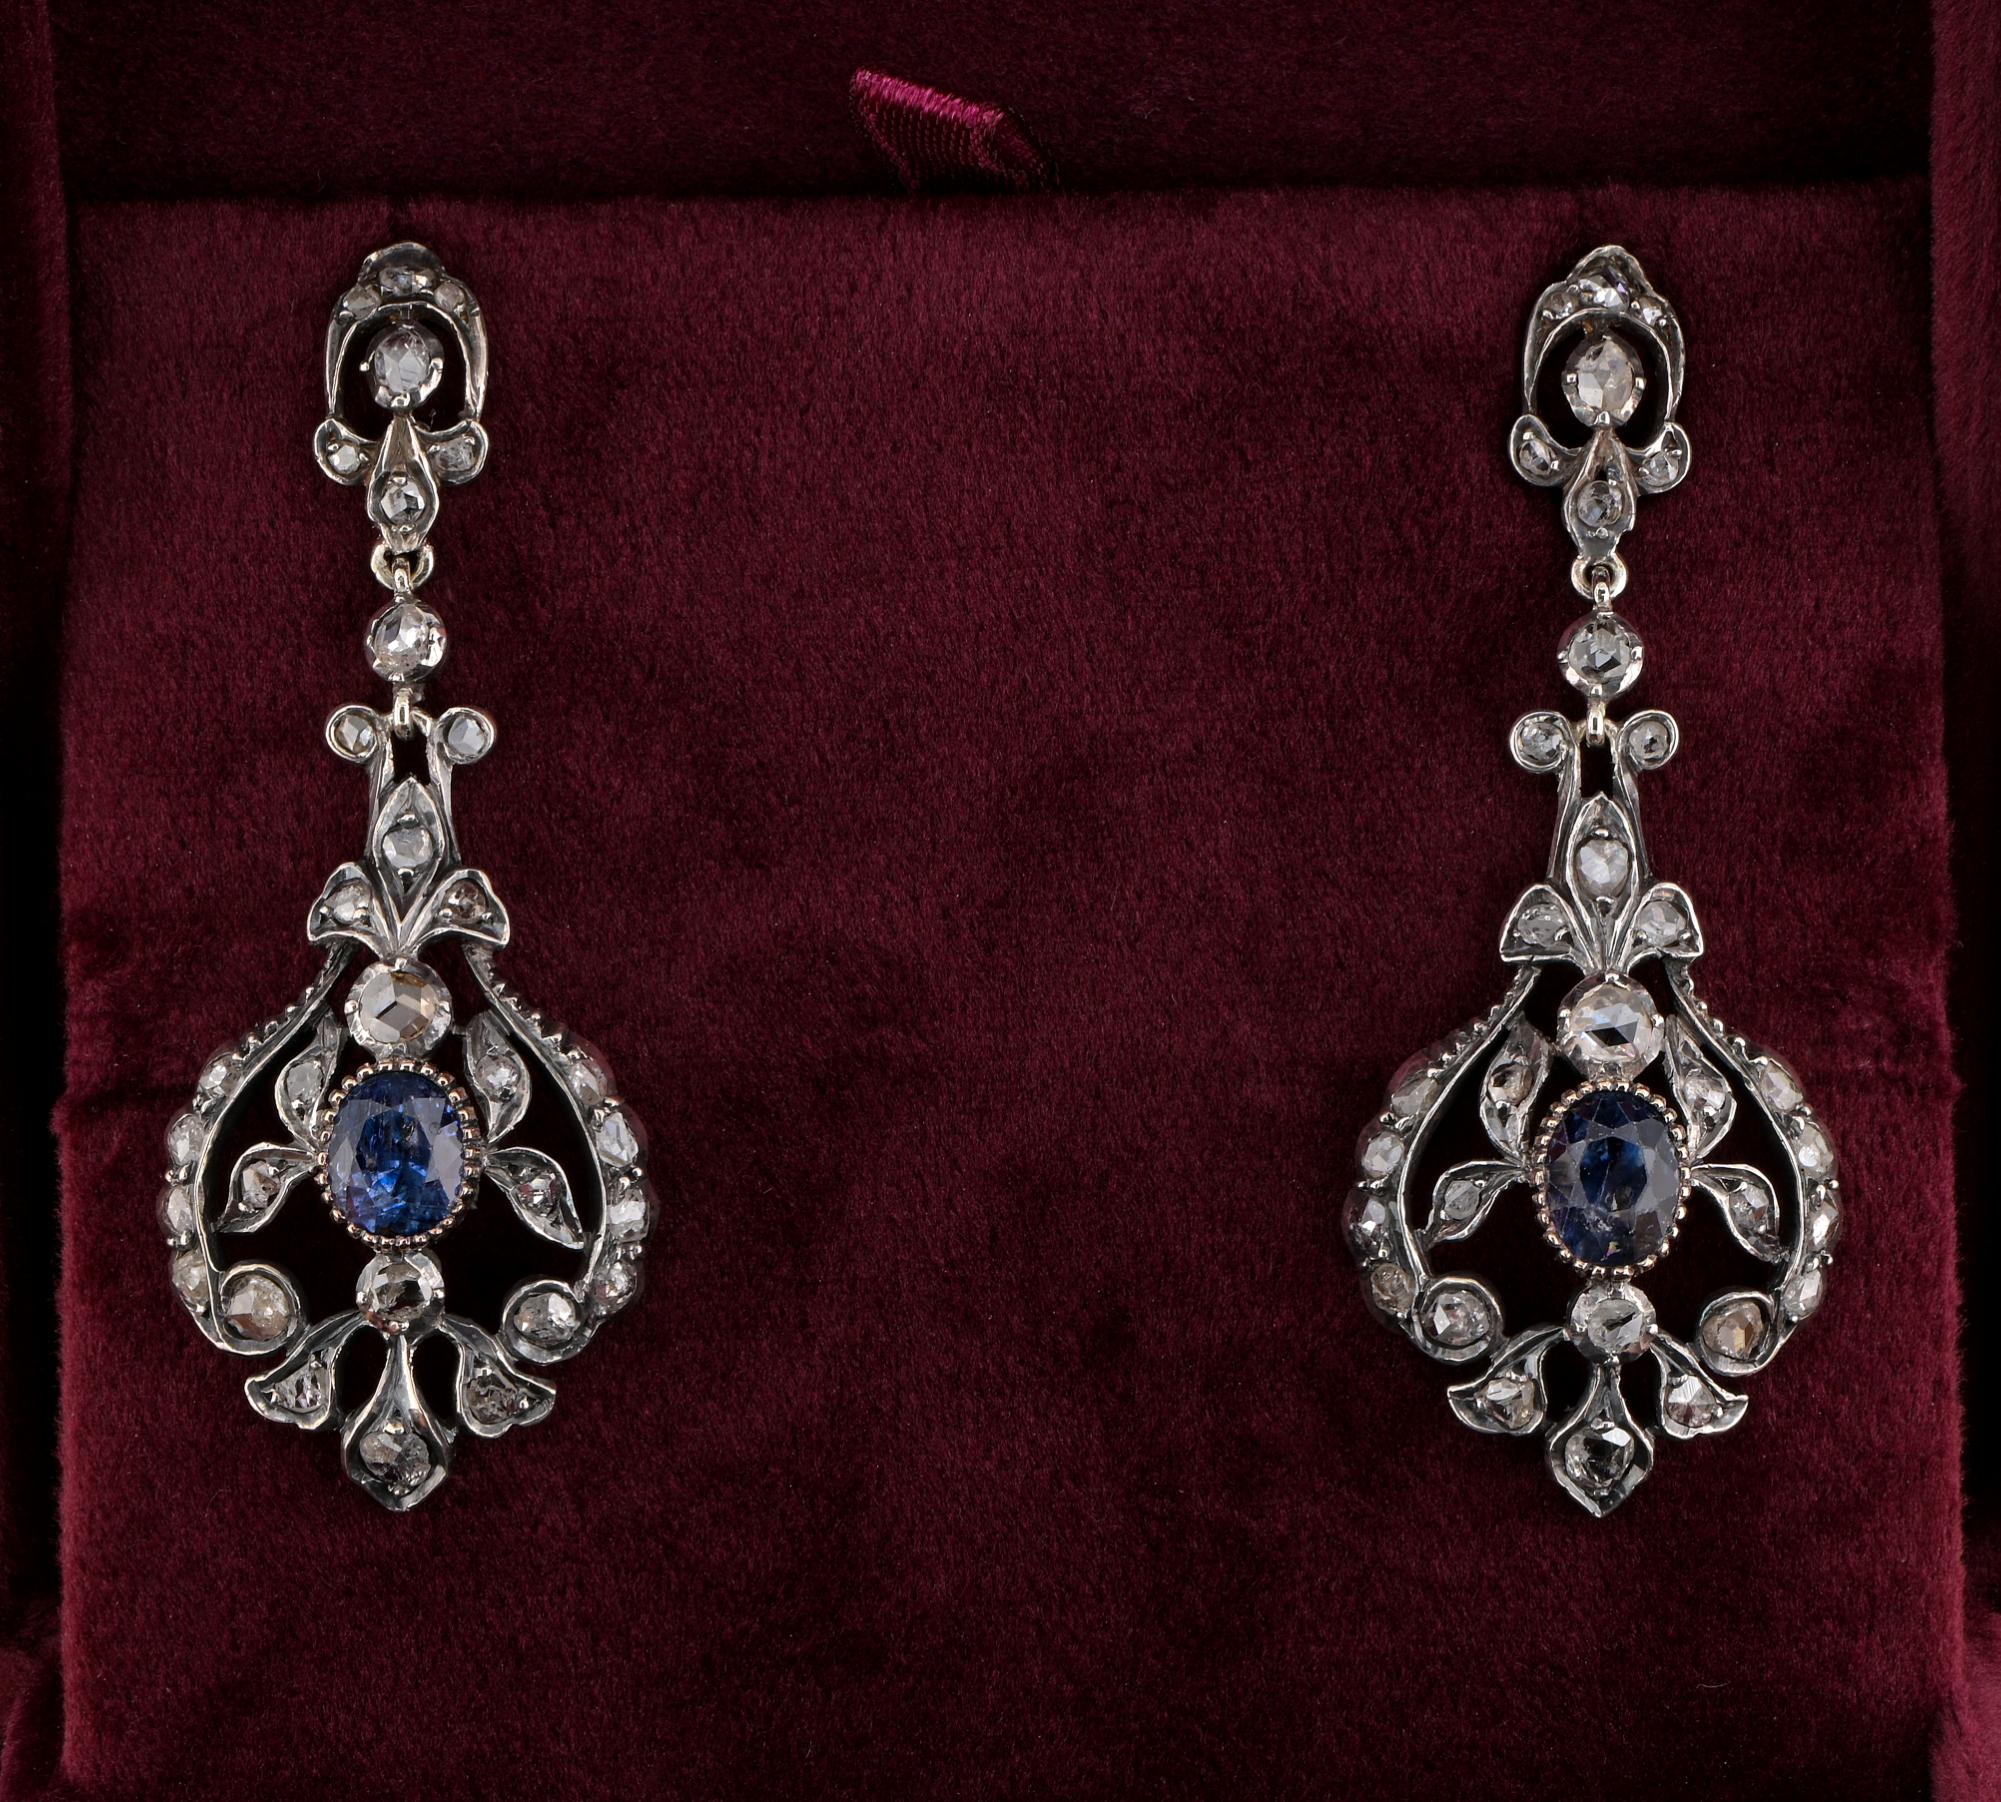 These beautiful antique earrings are 1890 circa
Hand crafted of solid 18 KT silver topped
Charmingly scroll designed in a fabulous openwork
Set throughout with a selection of 70 antique rose cut Diamonds varying in sizes to fit the design,